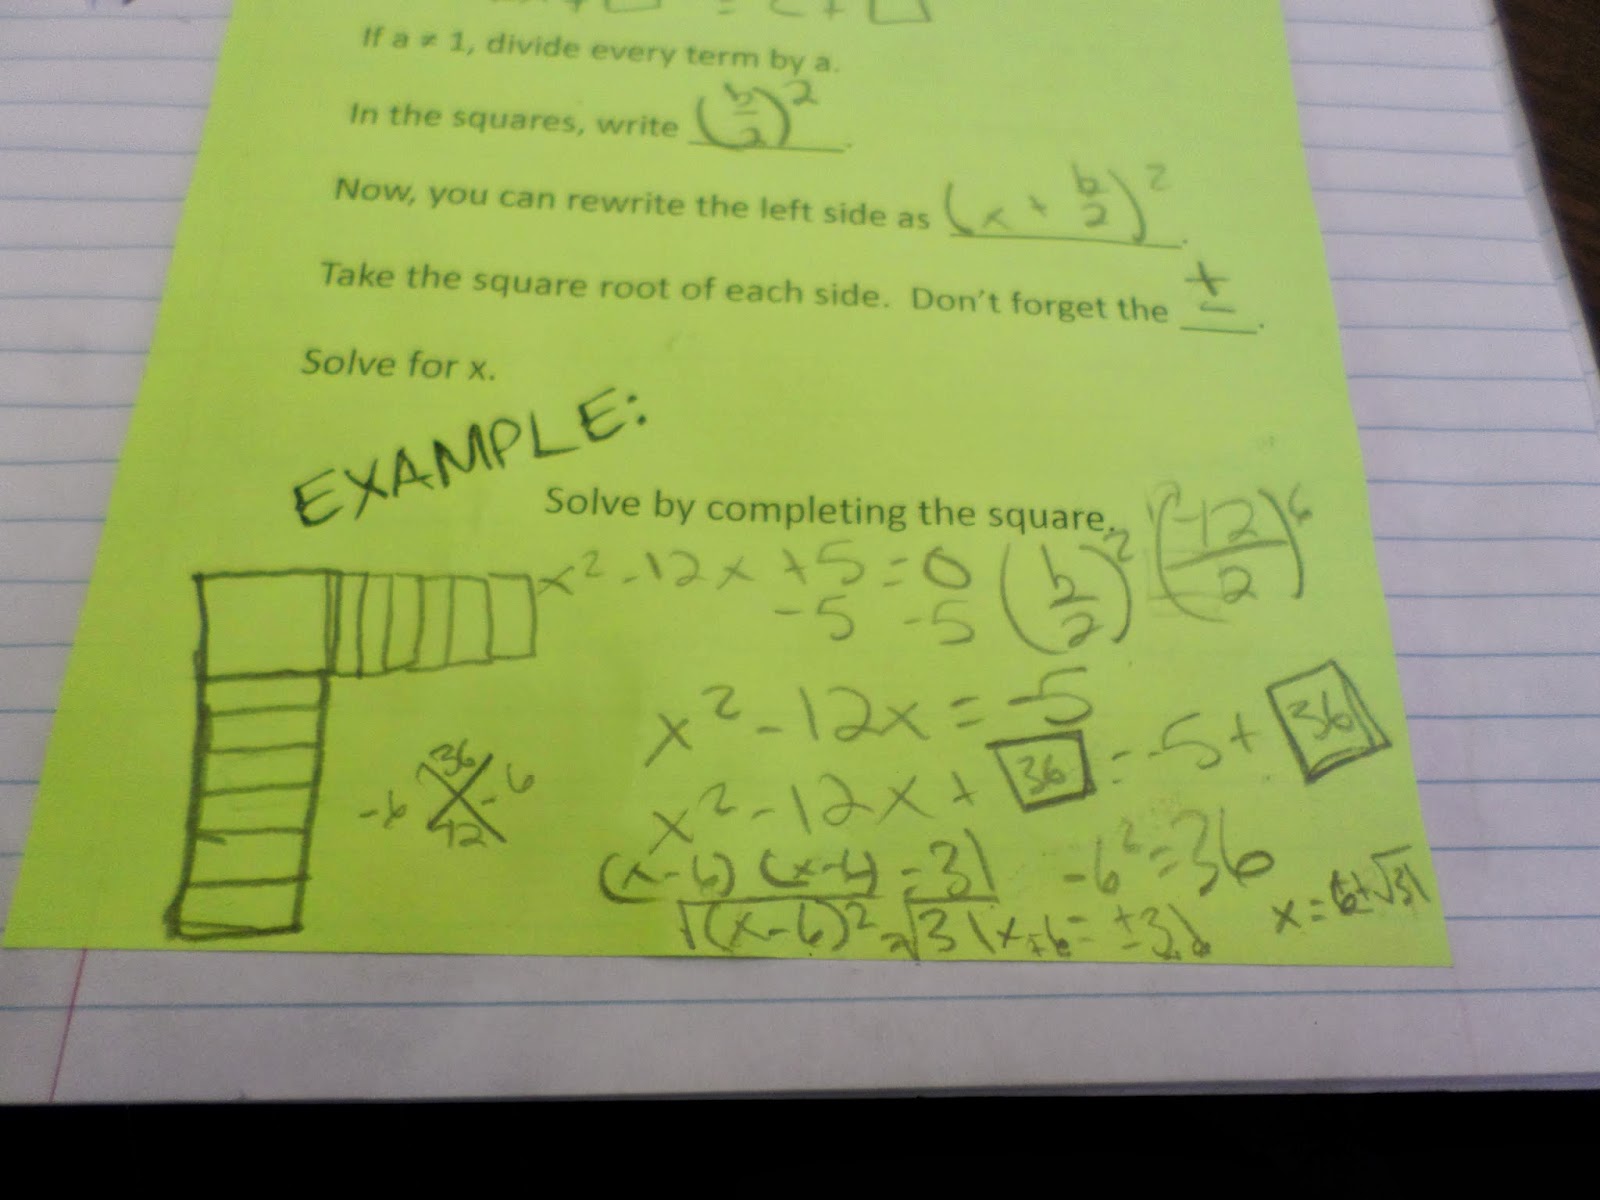 Completing the Square Graphic Organizer in Algebra Interactive Notebook